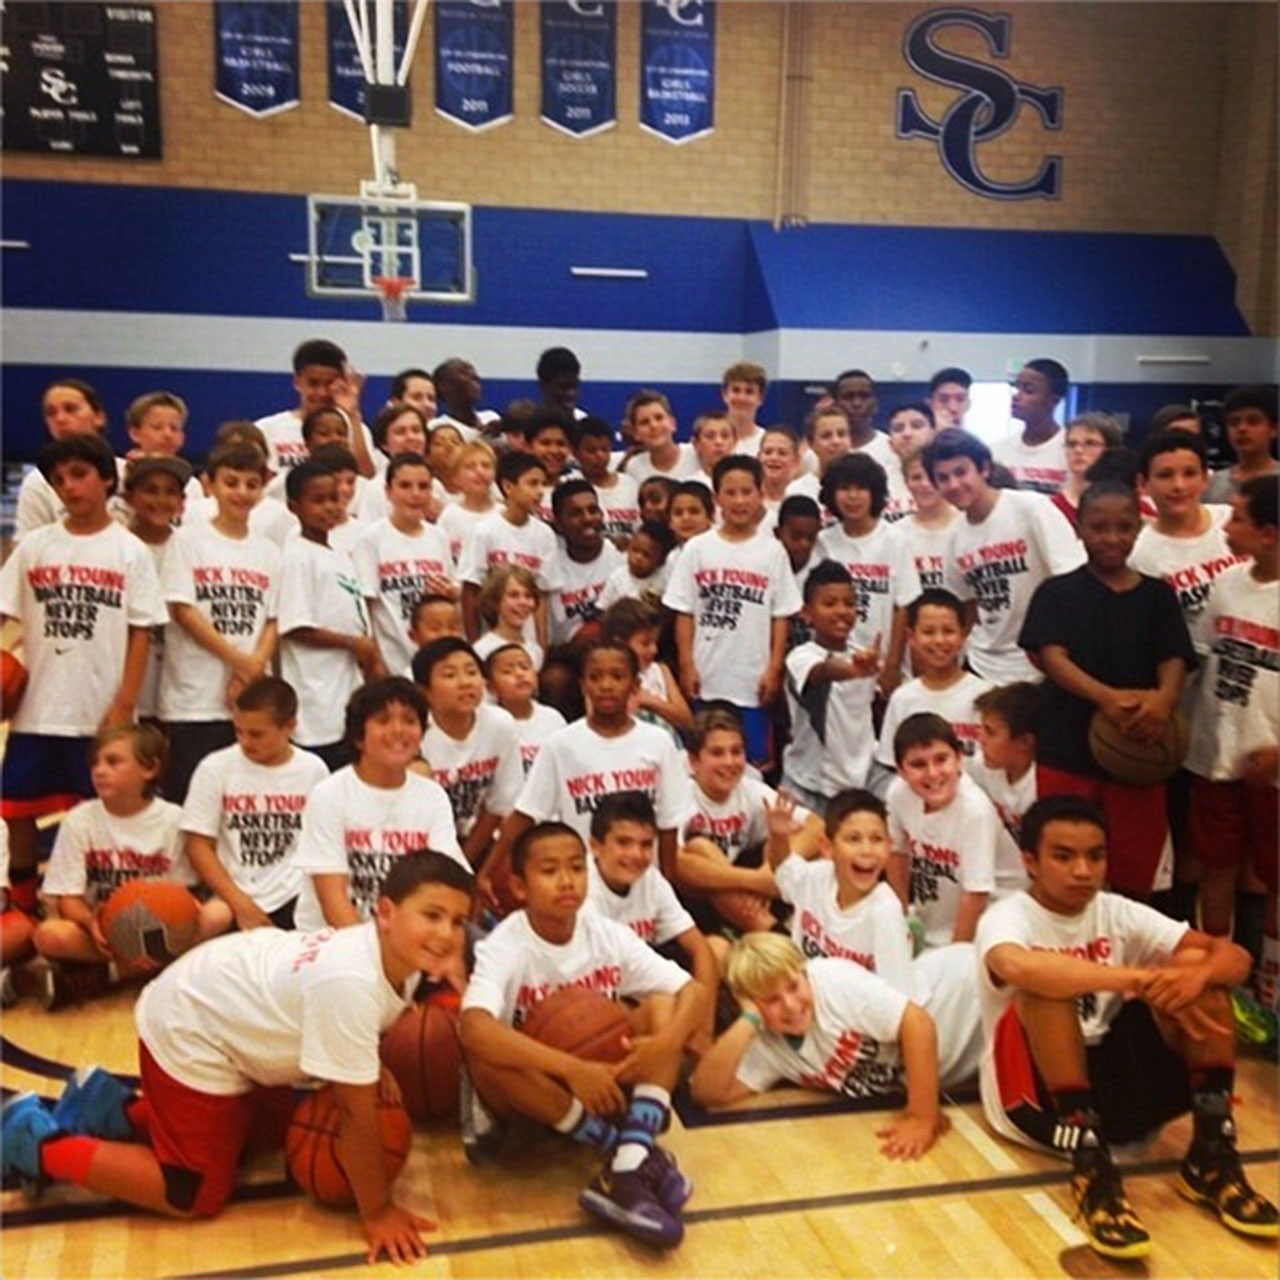 Nick Young basketball camp video goes viral